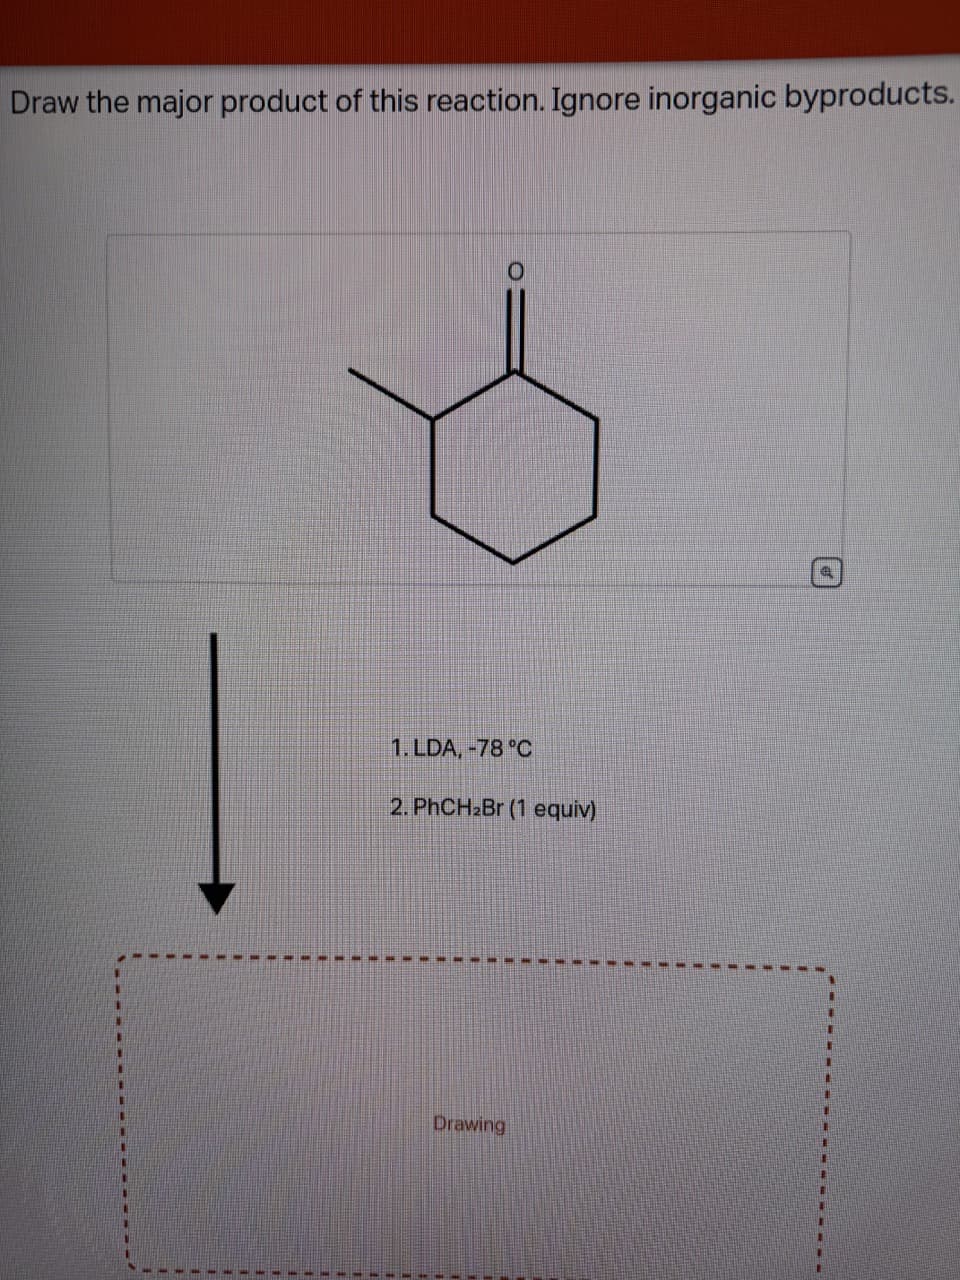 Draw the major product of this reaction. Ignore inorganic byproducts.
1. LDA, -78 °C
2. PhCH2Br (1 equiv)
Drawing